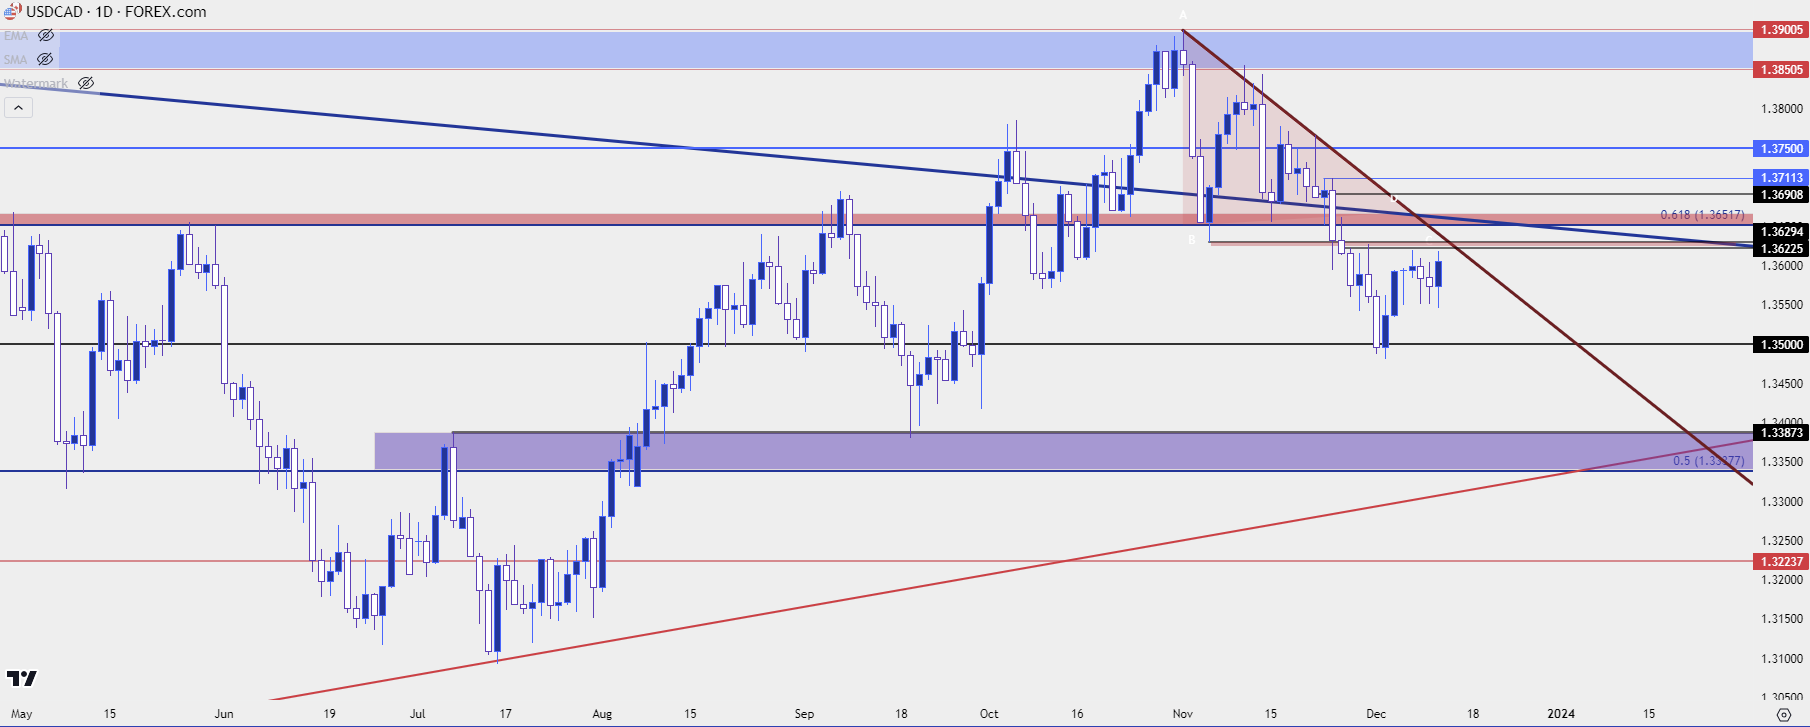 USD/CAD Price Analysis: Bears near multi-month support close to